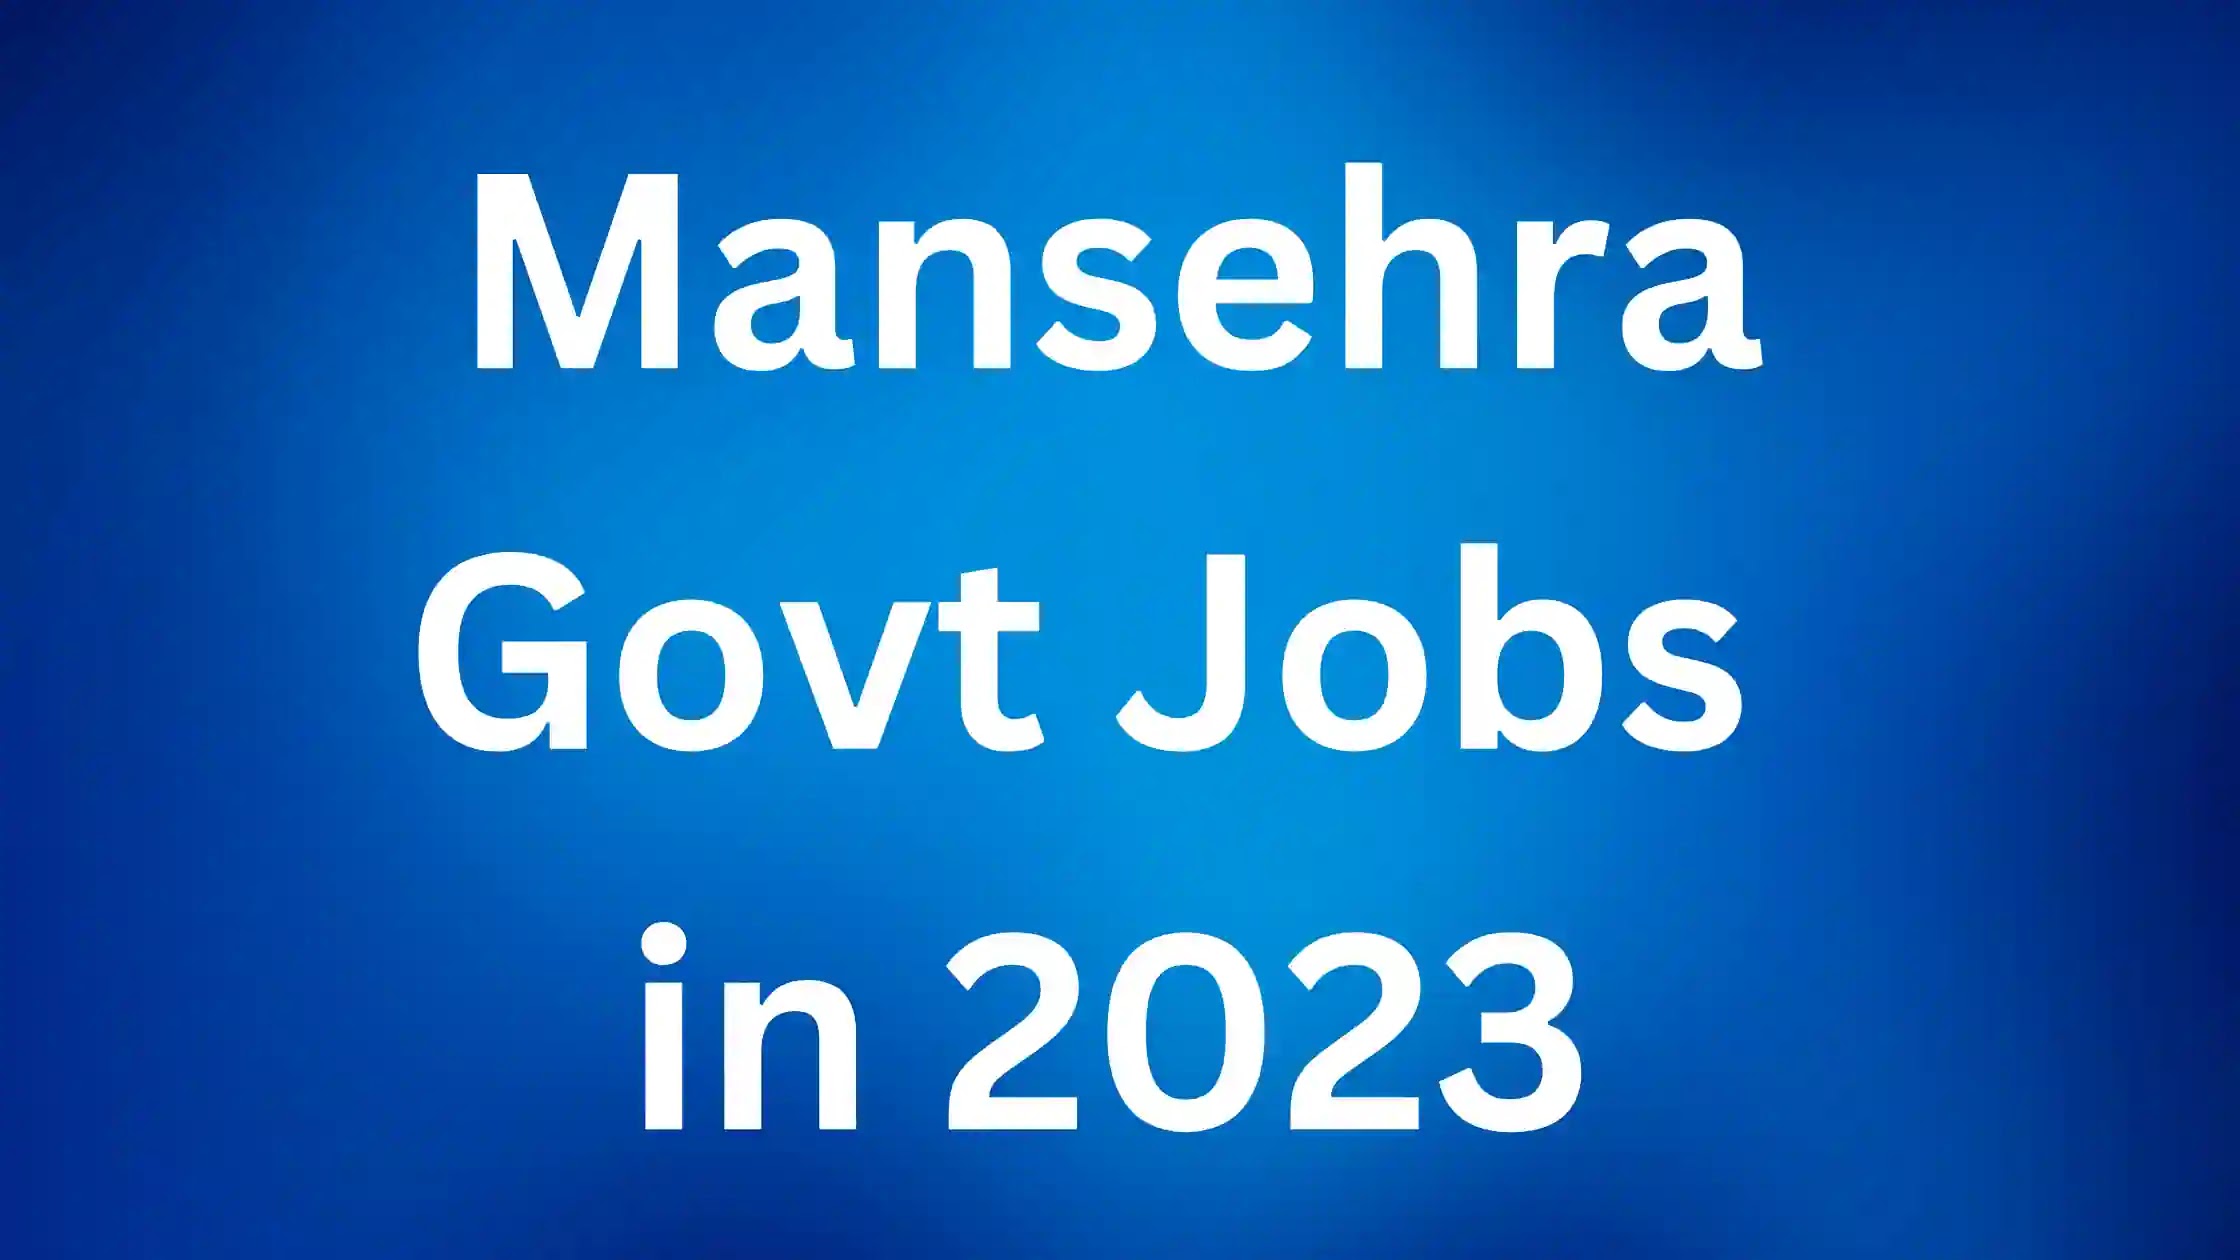 District and Session Judge Govt Jobs in Mansehra in 2023